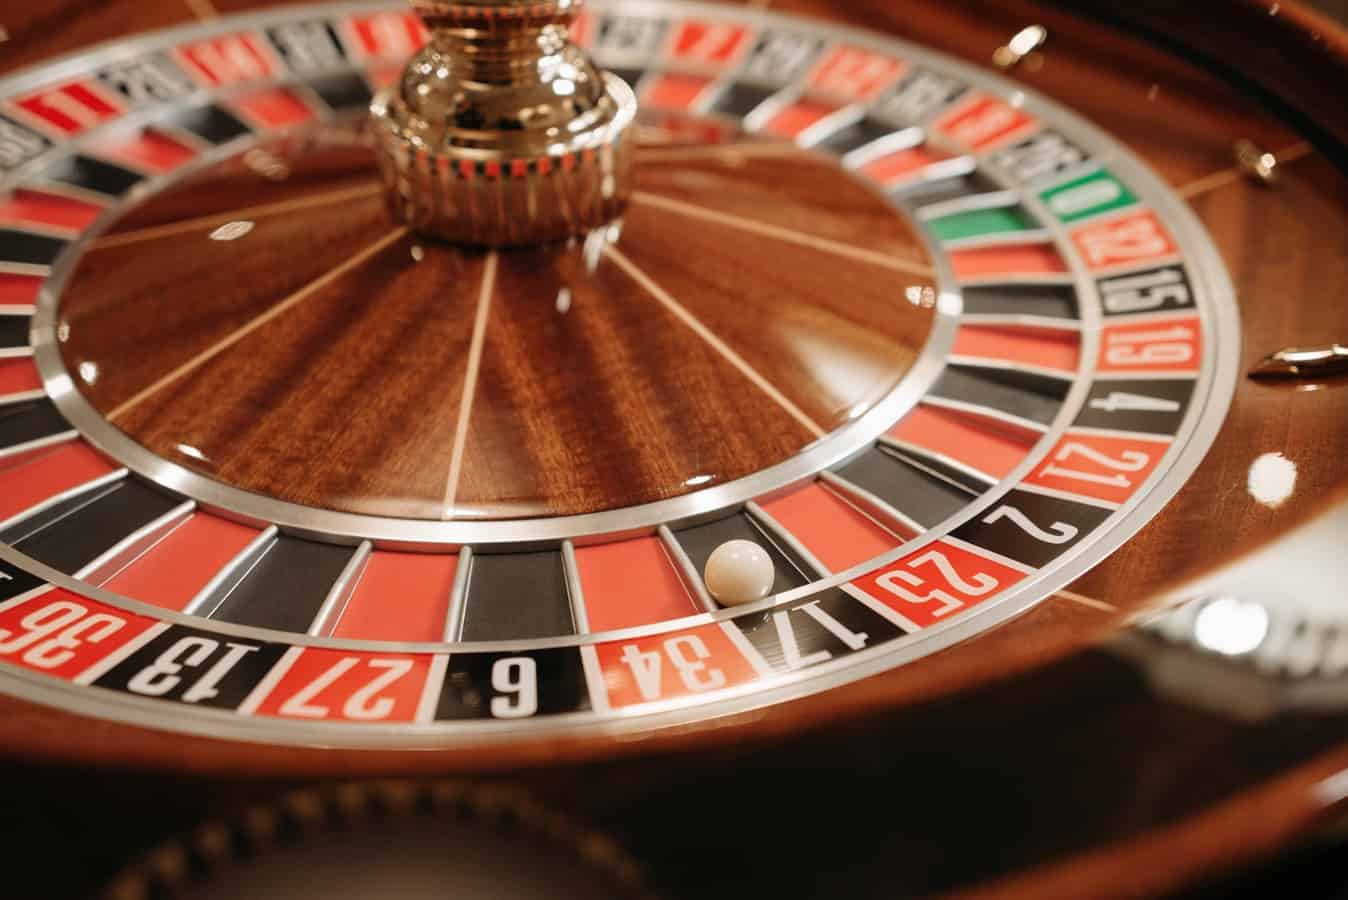 Heard Of The bitcoin casinos Effect? Here It Is